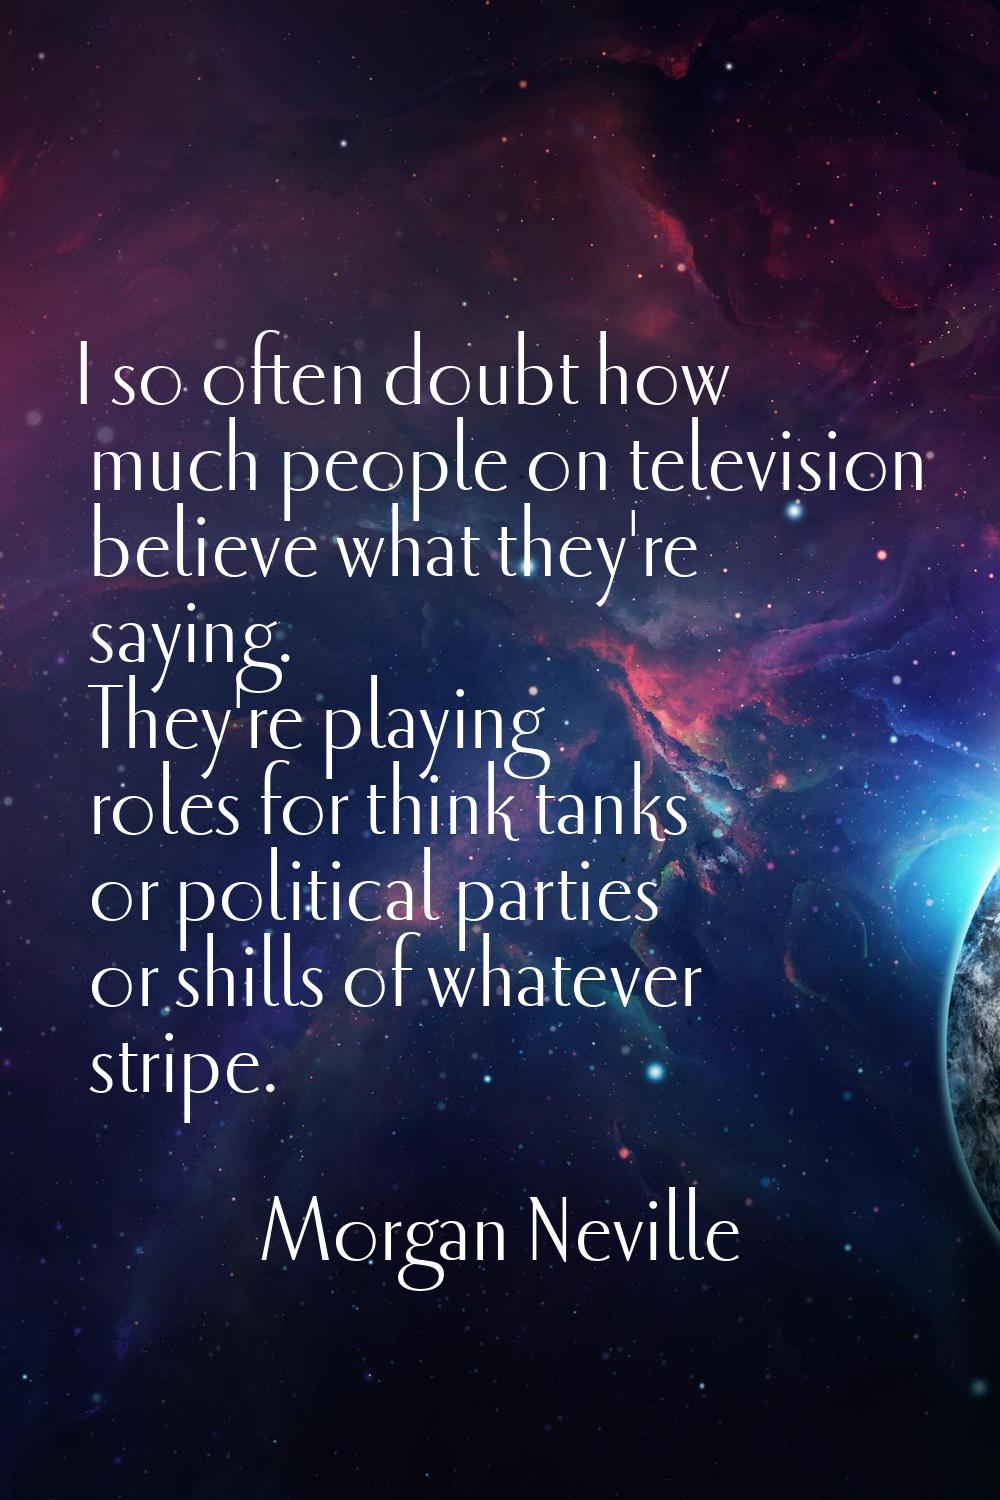 I so often doubt how much people on television believe what they're saying. They're playing roles f